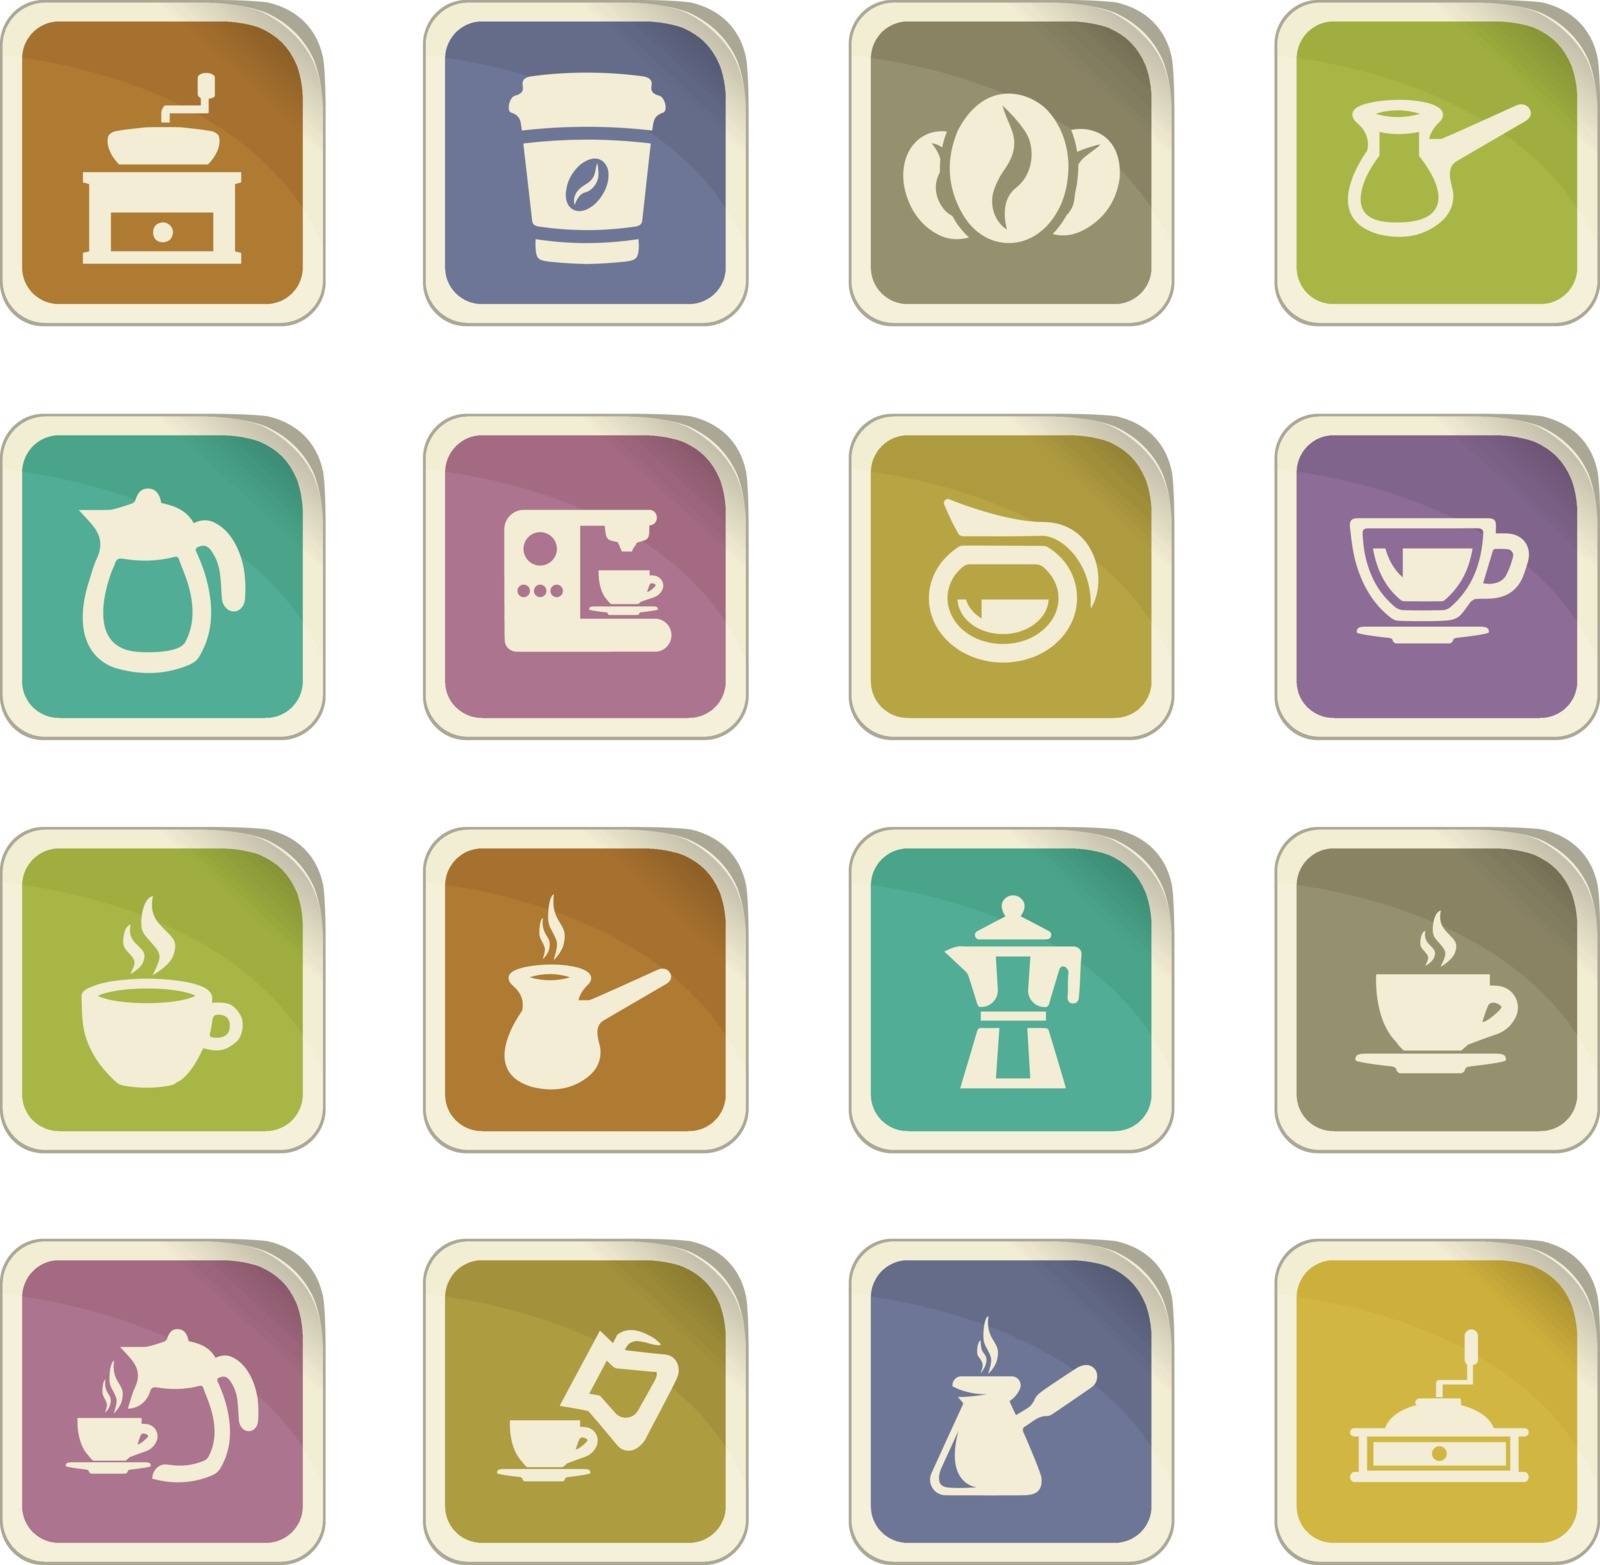 Coffee icon set for web sites and user interface